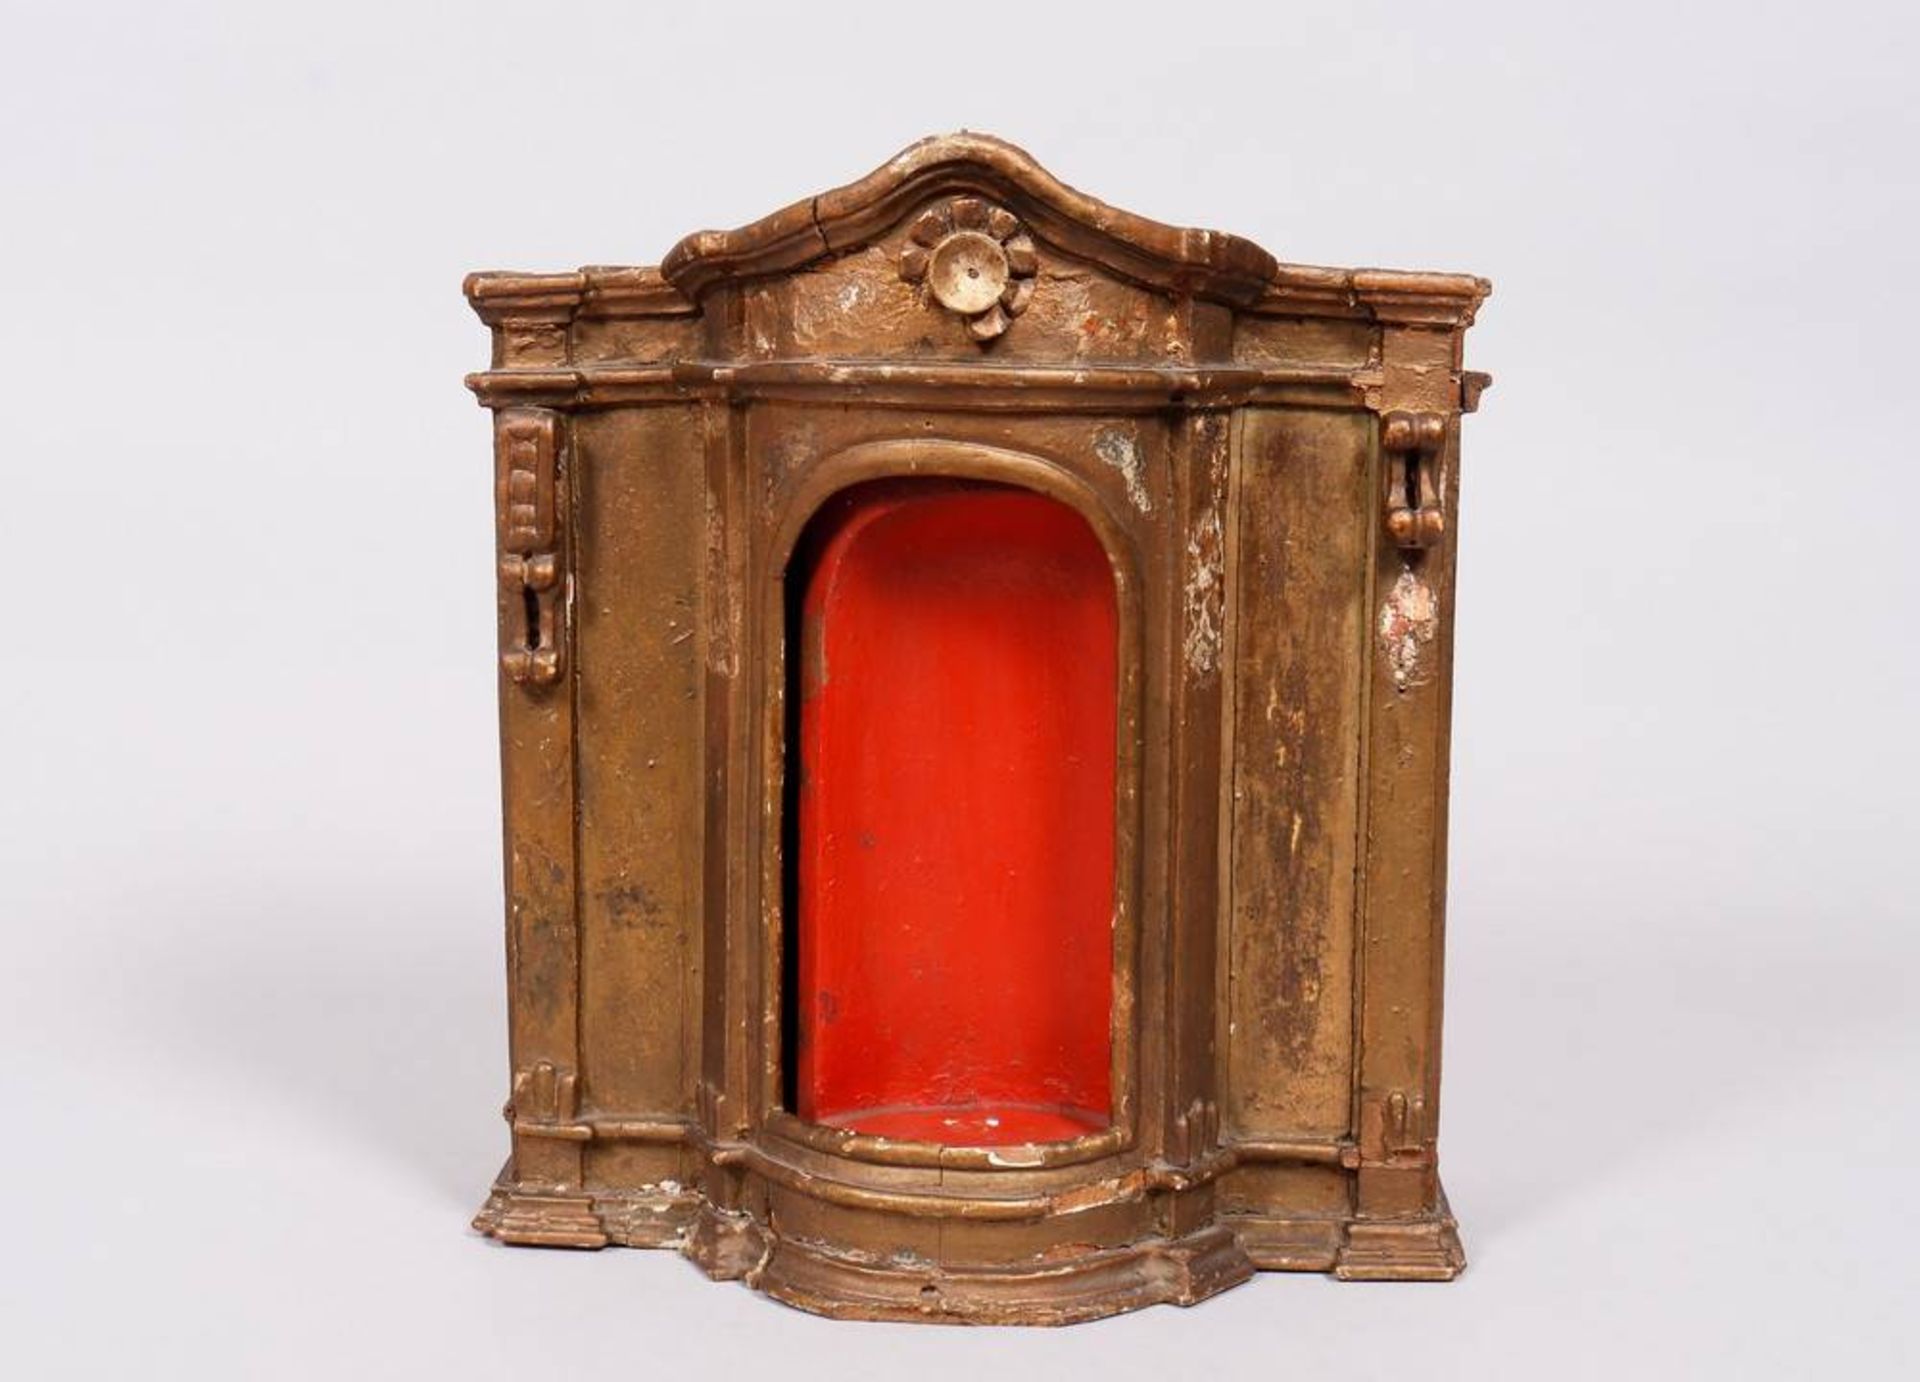 Small baroque house altar, probably South German, 18th C. - Image 2 of 4